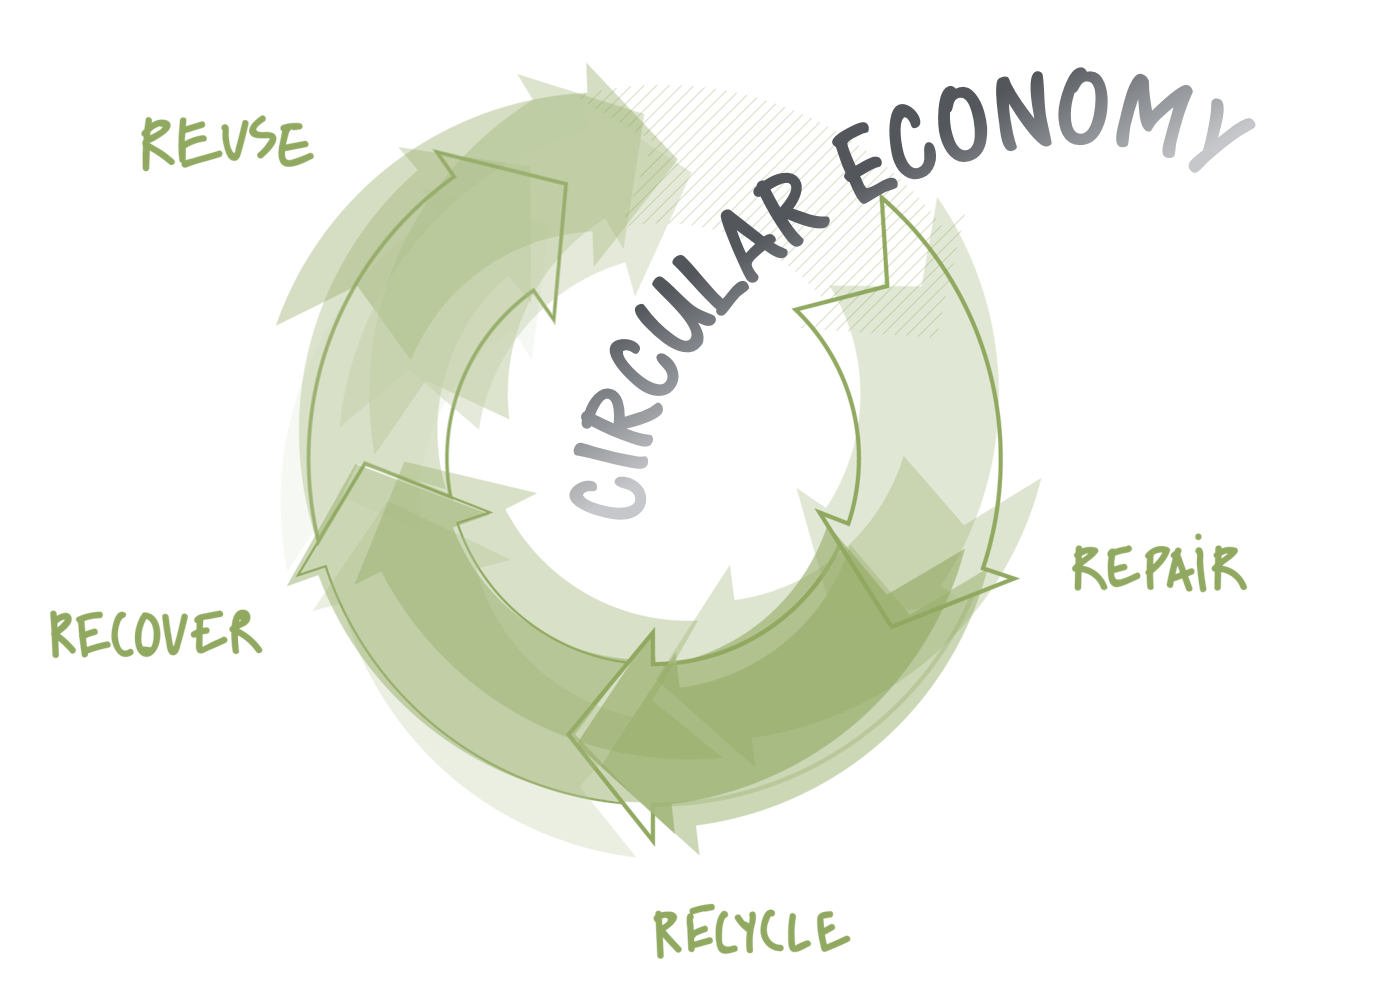 Can Supply Chains Adjust to a Circular Economy Over the Next Decade? Part 2  - Enterra Solutions